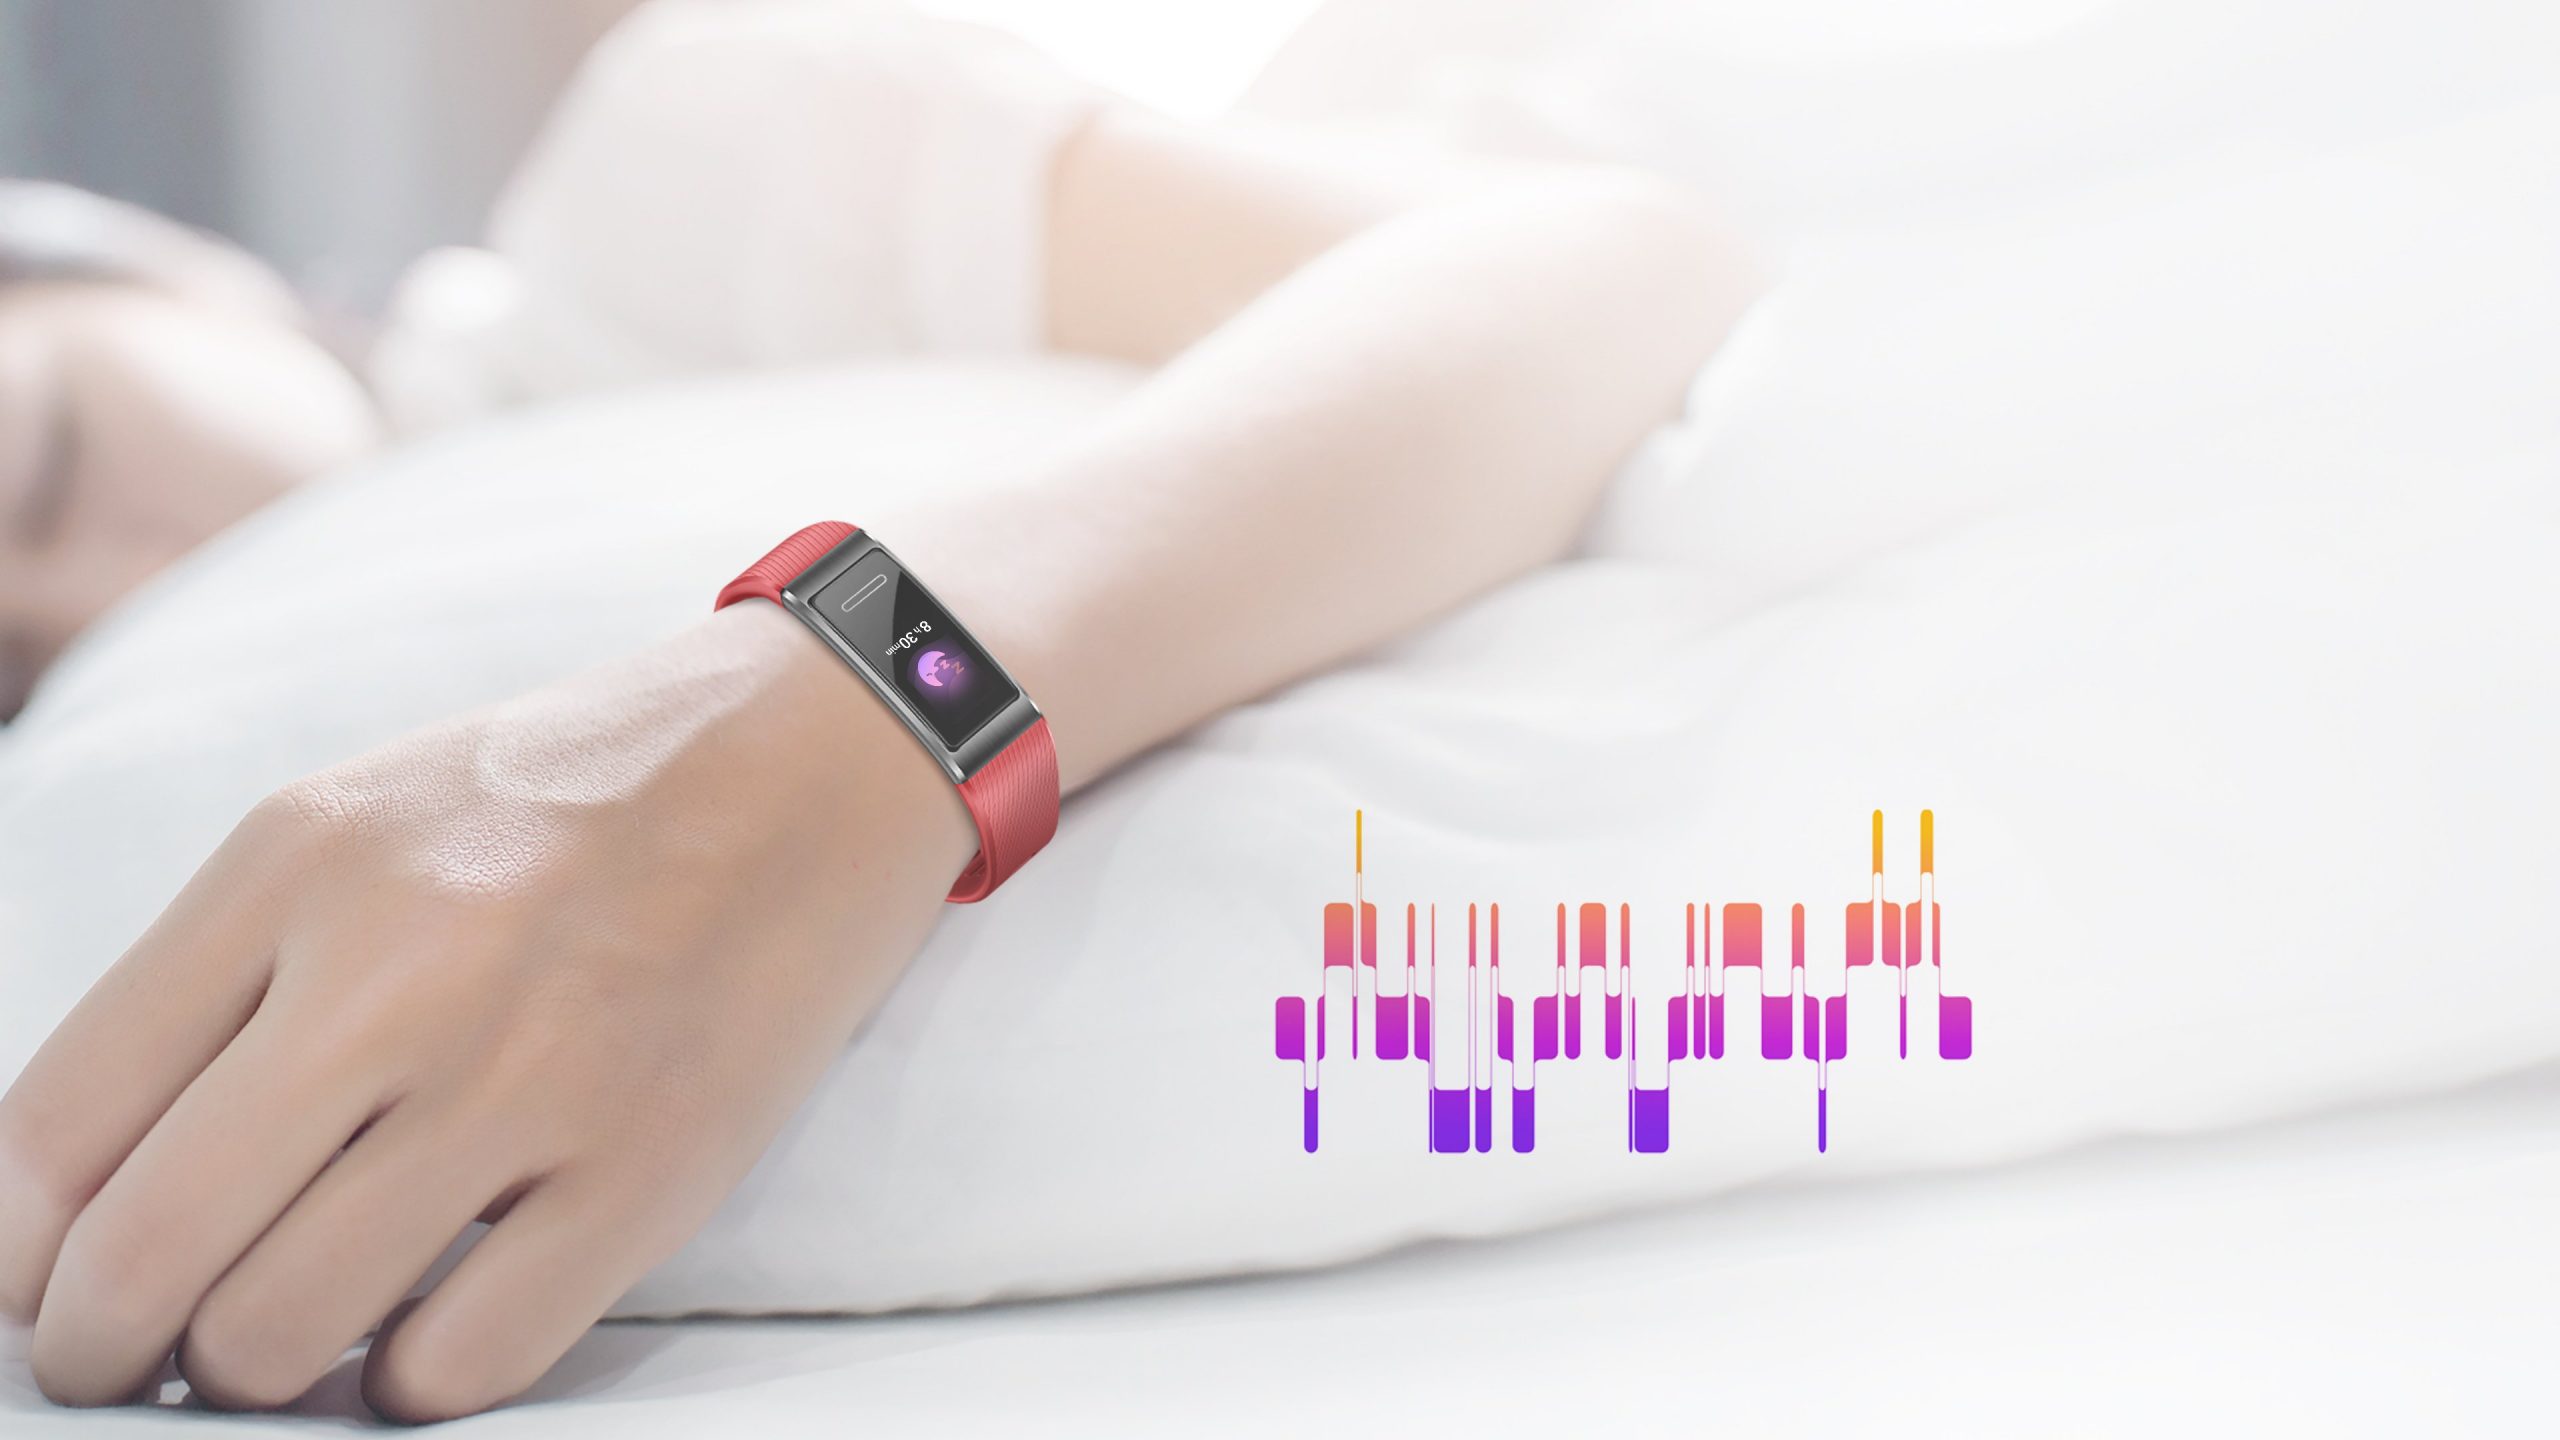 Functions of the Huawei Band 4 fitness bracelet